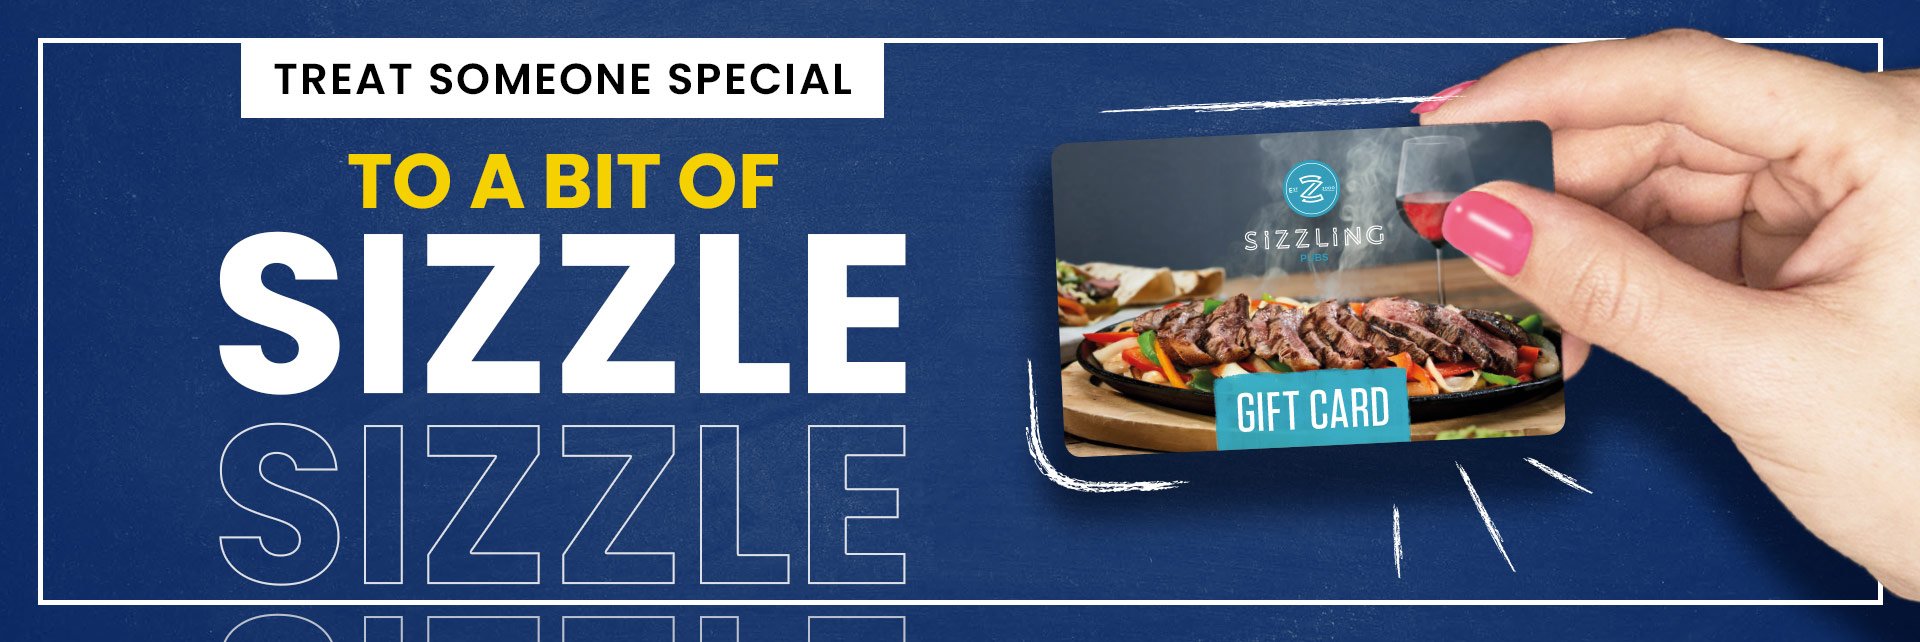 Sizzling Pubs Gift Card at The Old Maypole in Ilford